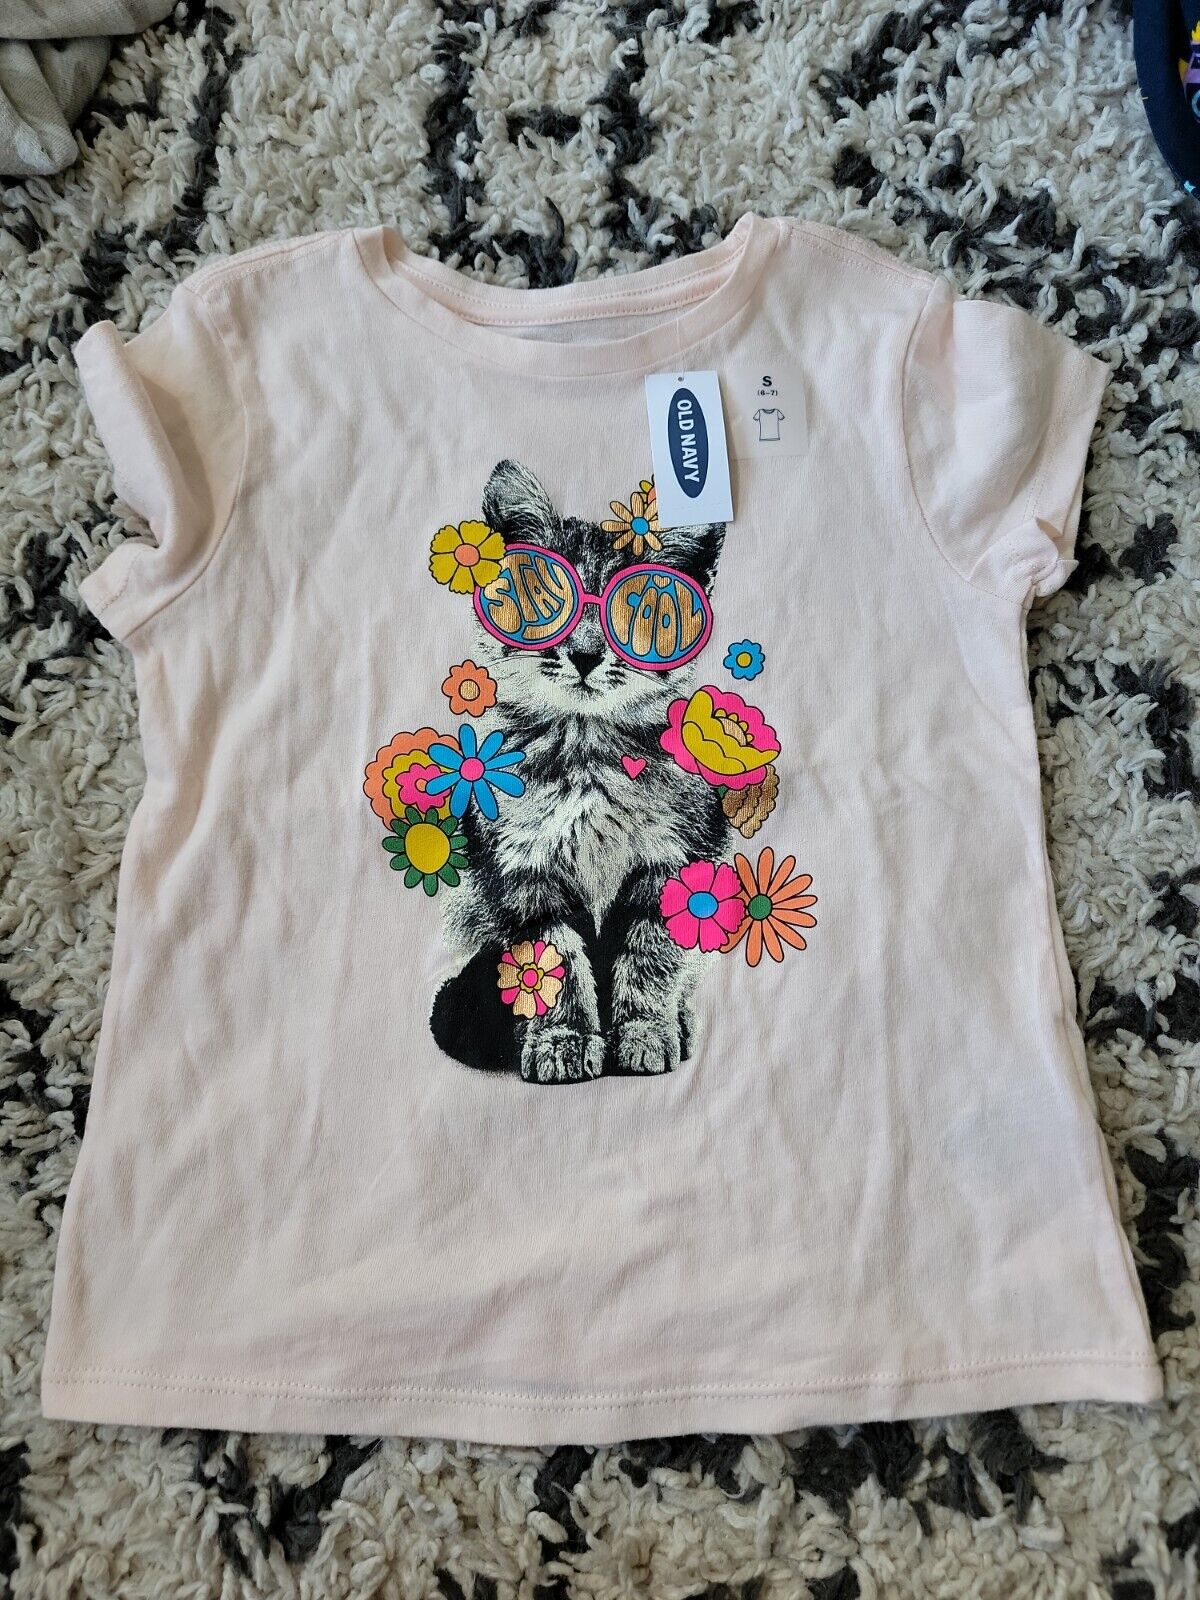 Nwt Girls Old Navy Kitten Kitty Cat Hippy Tshirt Graphic Tee Size Small 6-7